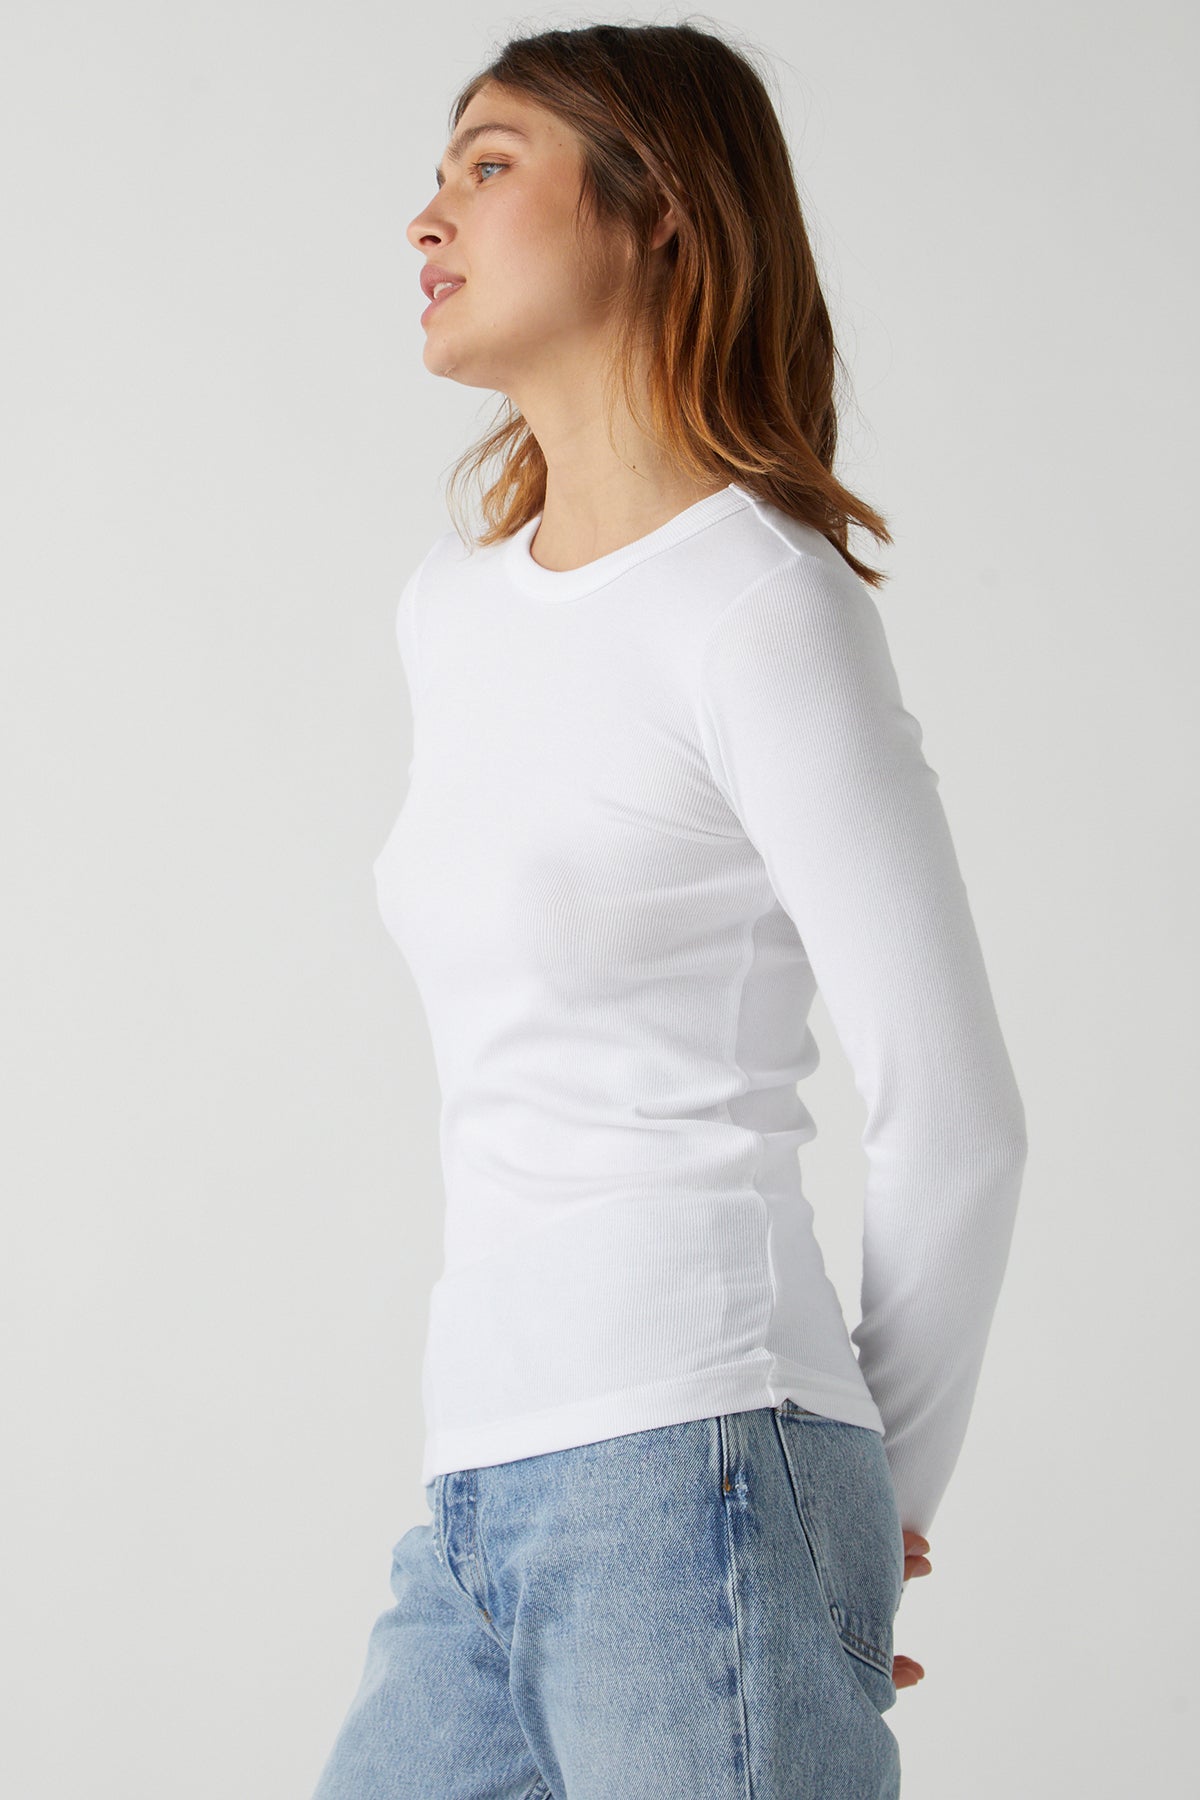 Camino Tee in white with blue denim side-26002801328321